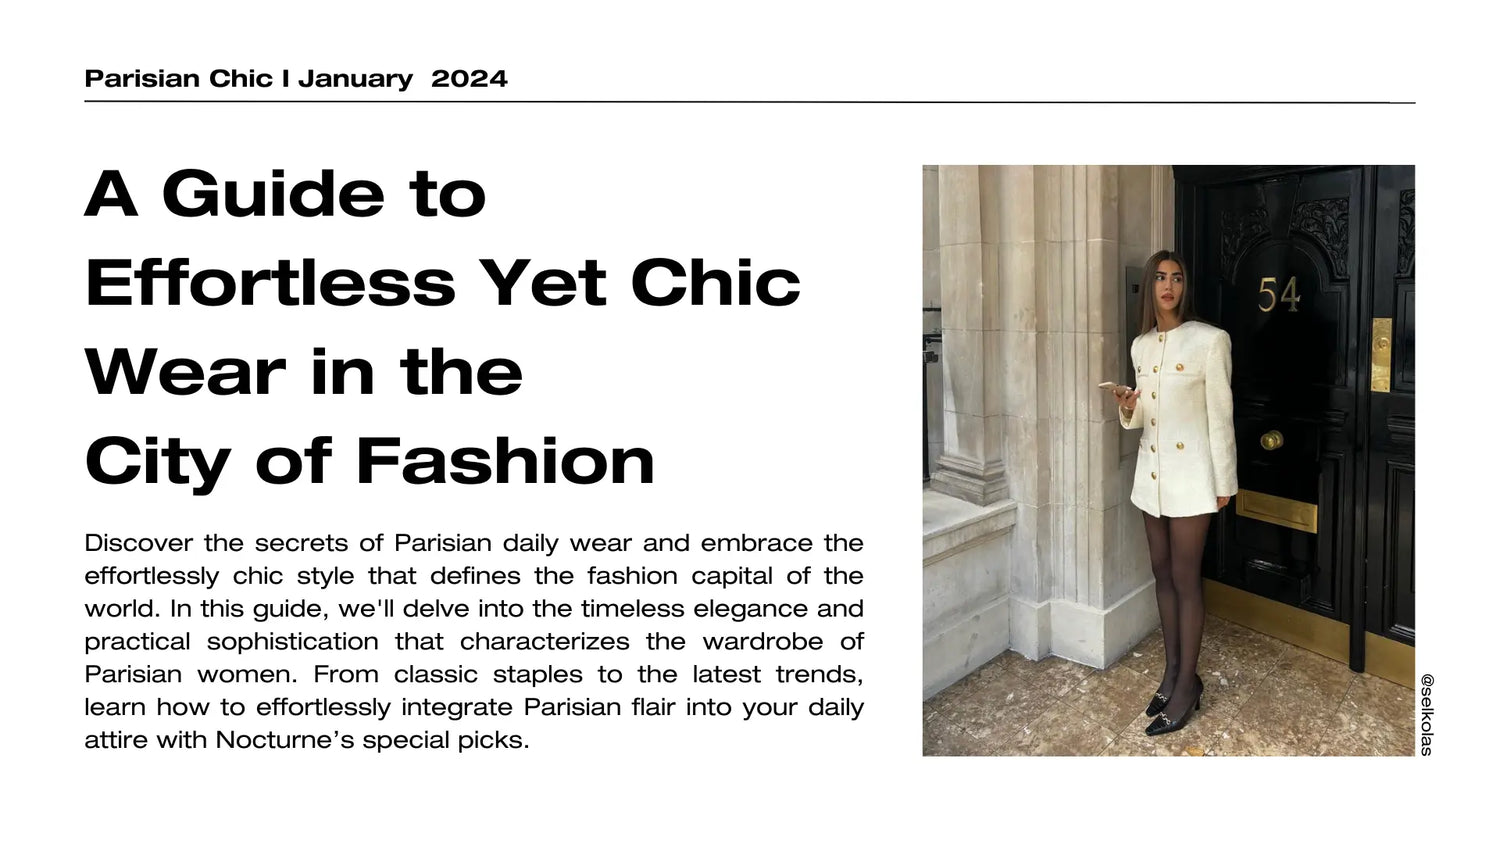 Parisian Chic: A Guide to Effortless Daily Wear in the City of Fashion